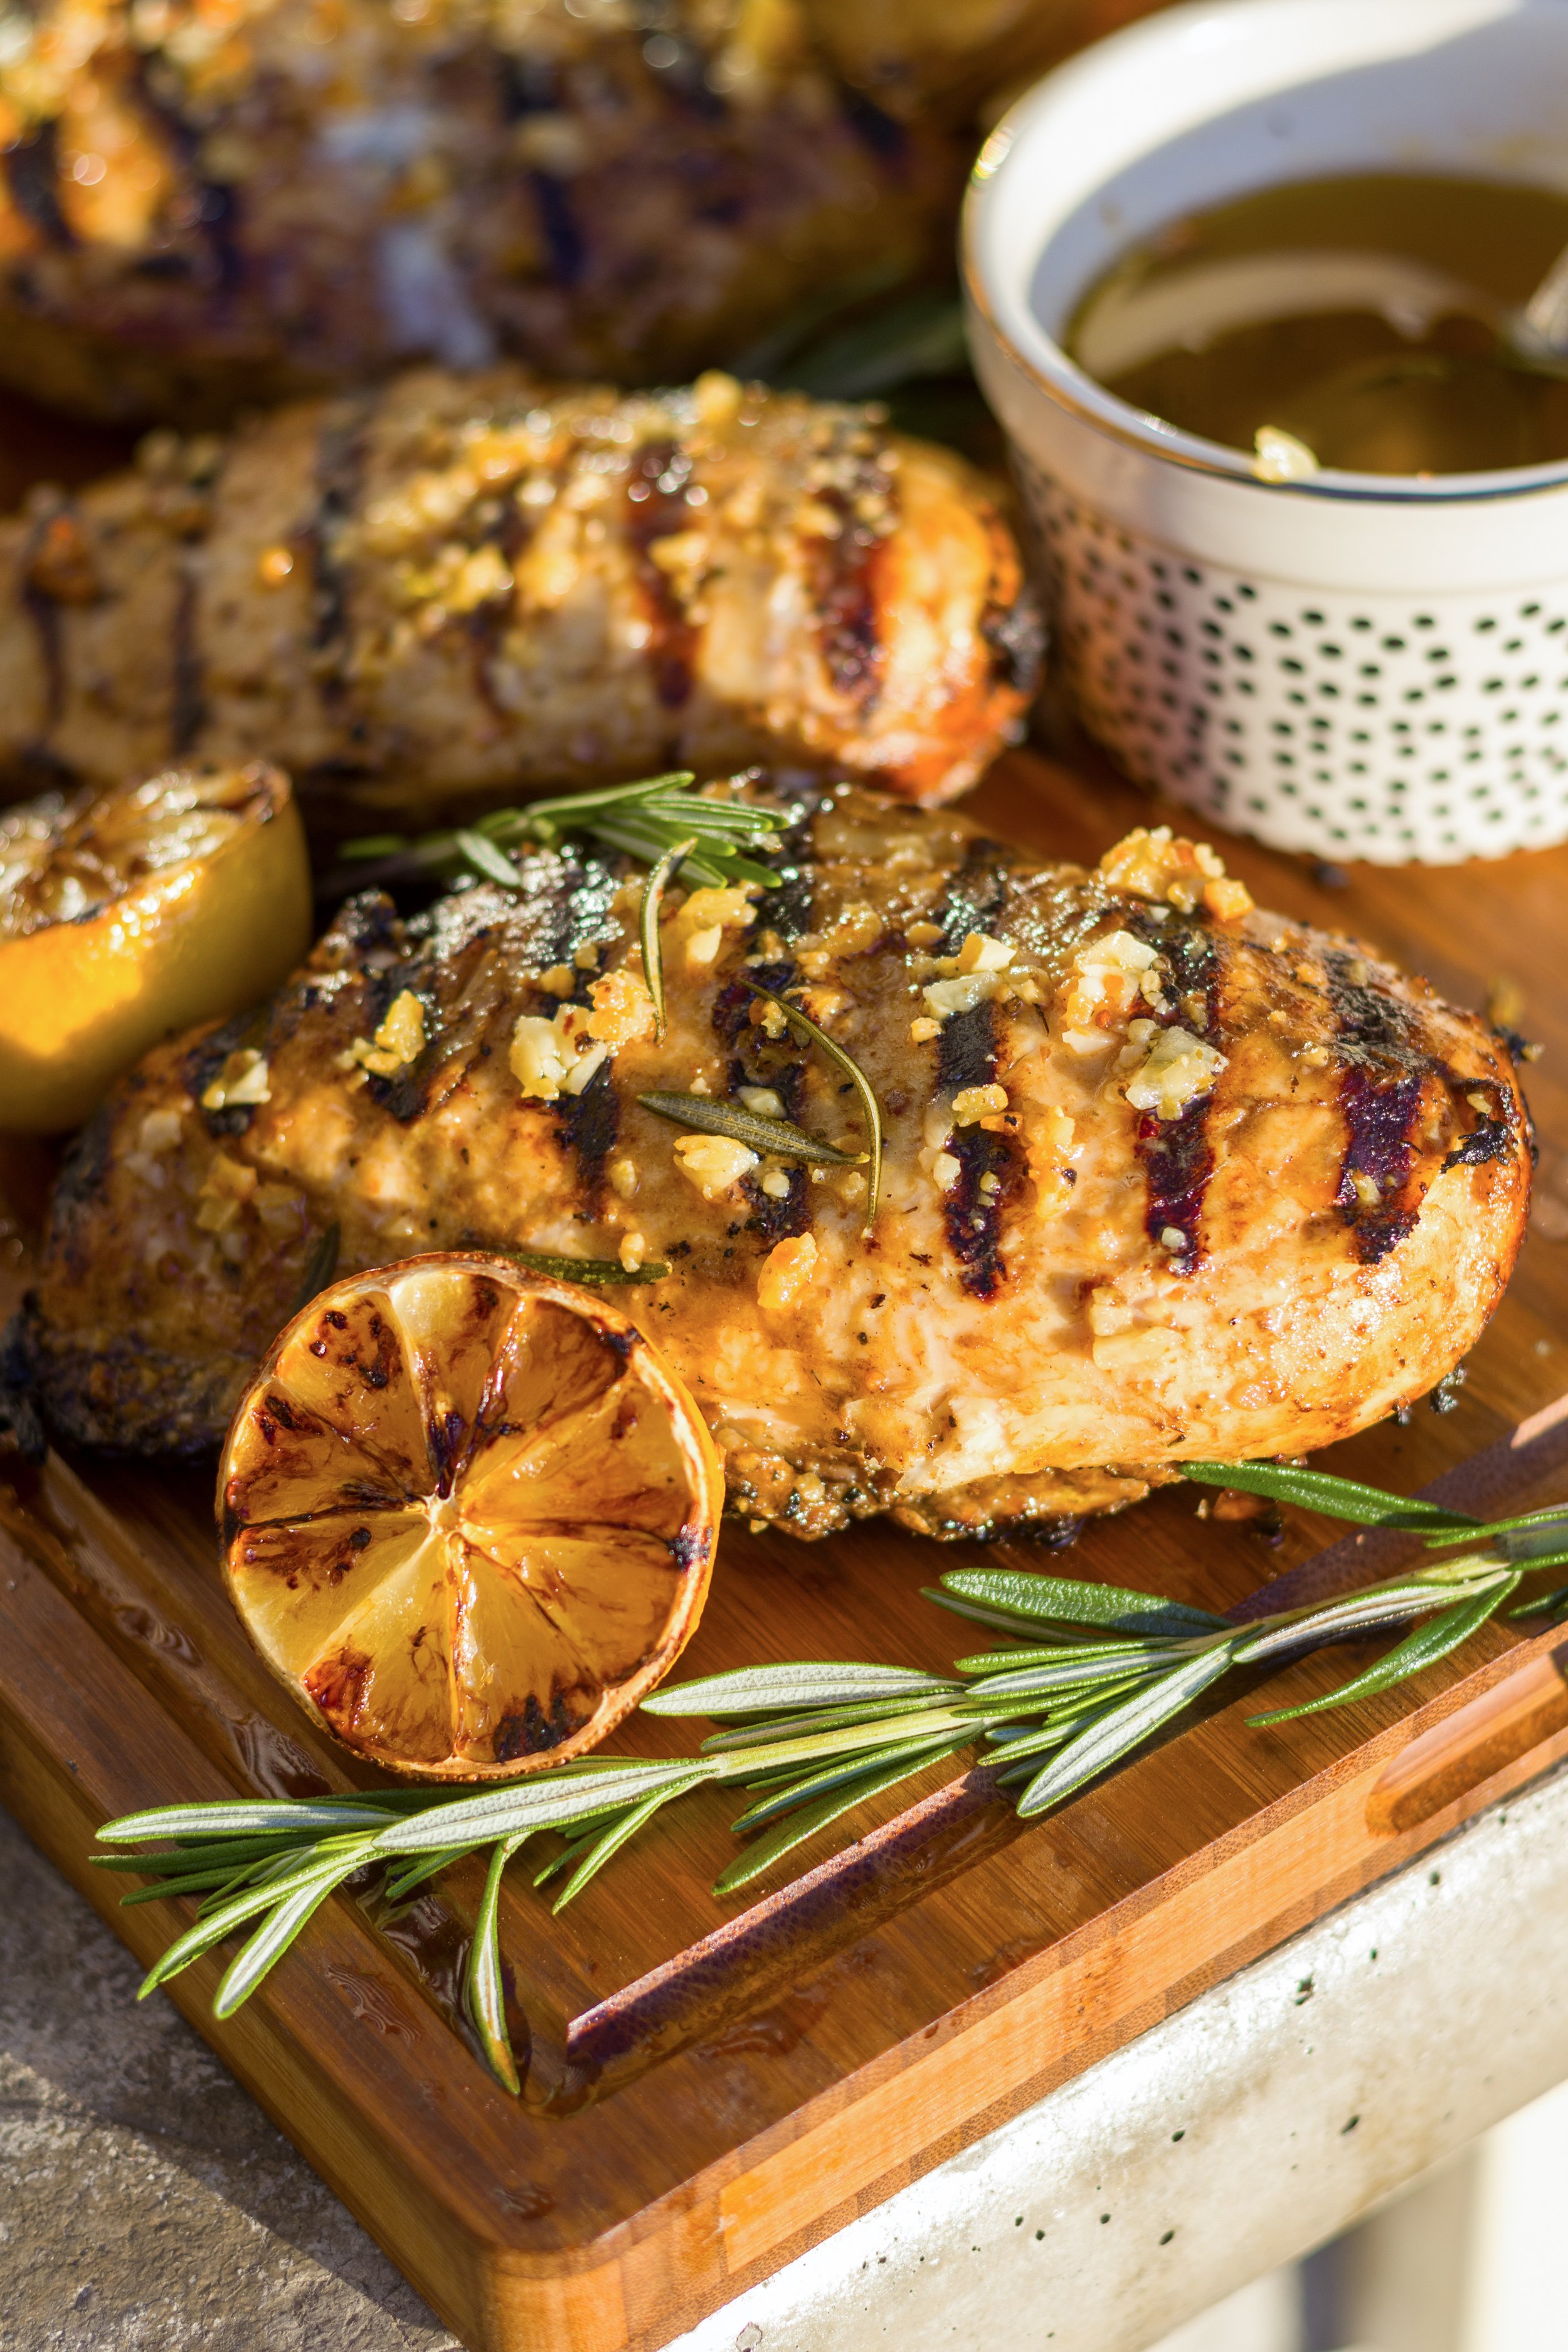 Home Chef® Heat and Eat Lemon Basil Grilled Chicken & Roasted